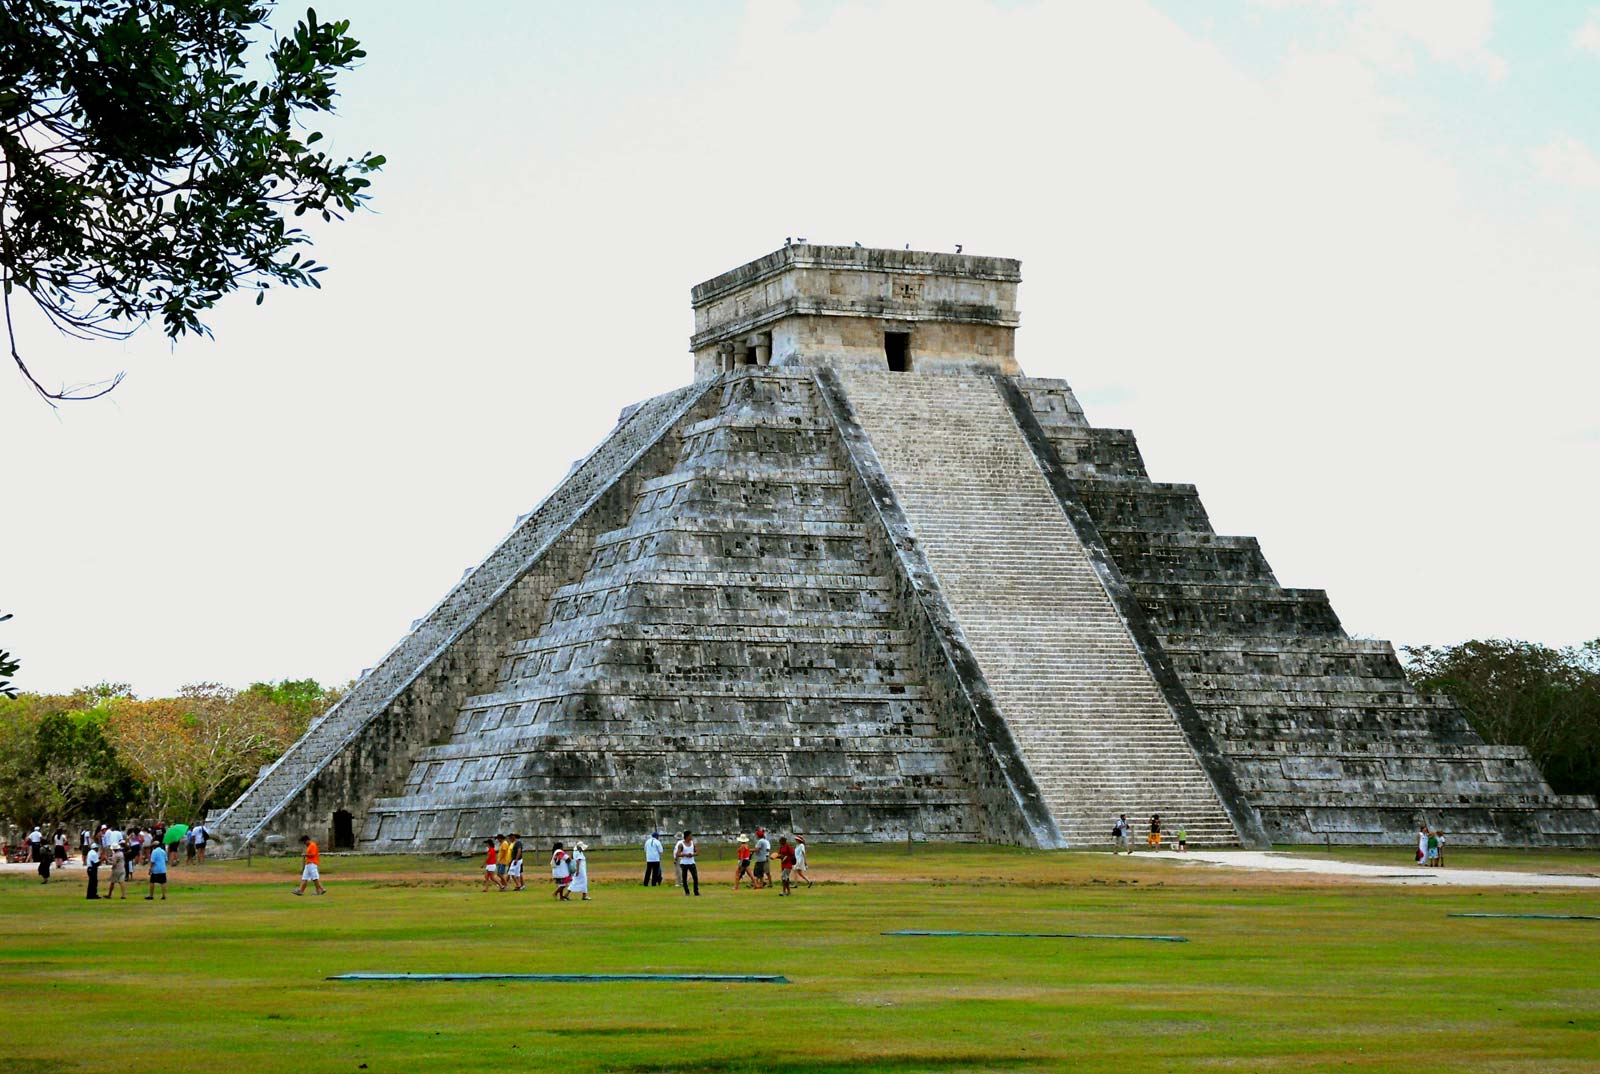 Can You *Actually* Score at Least 83% On This All-Rounded Knowledge Quiz? Chichen Itza in Yucatan, Mexico